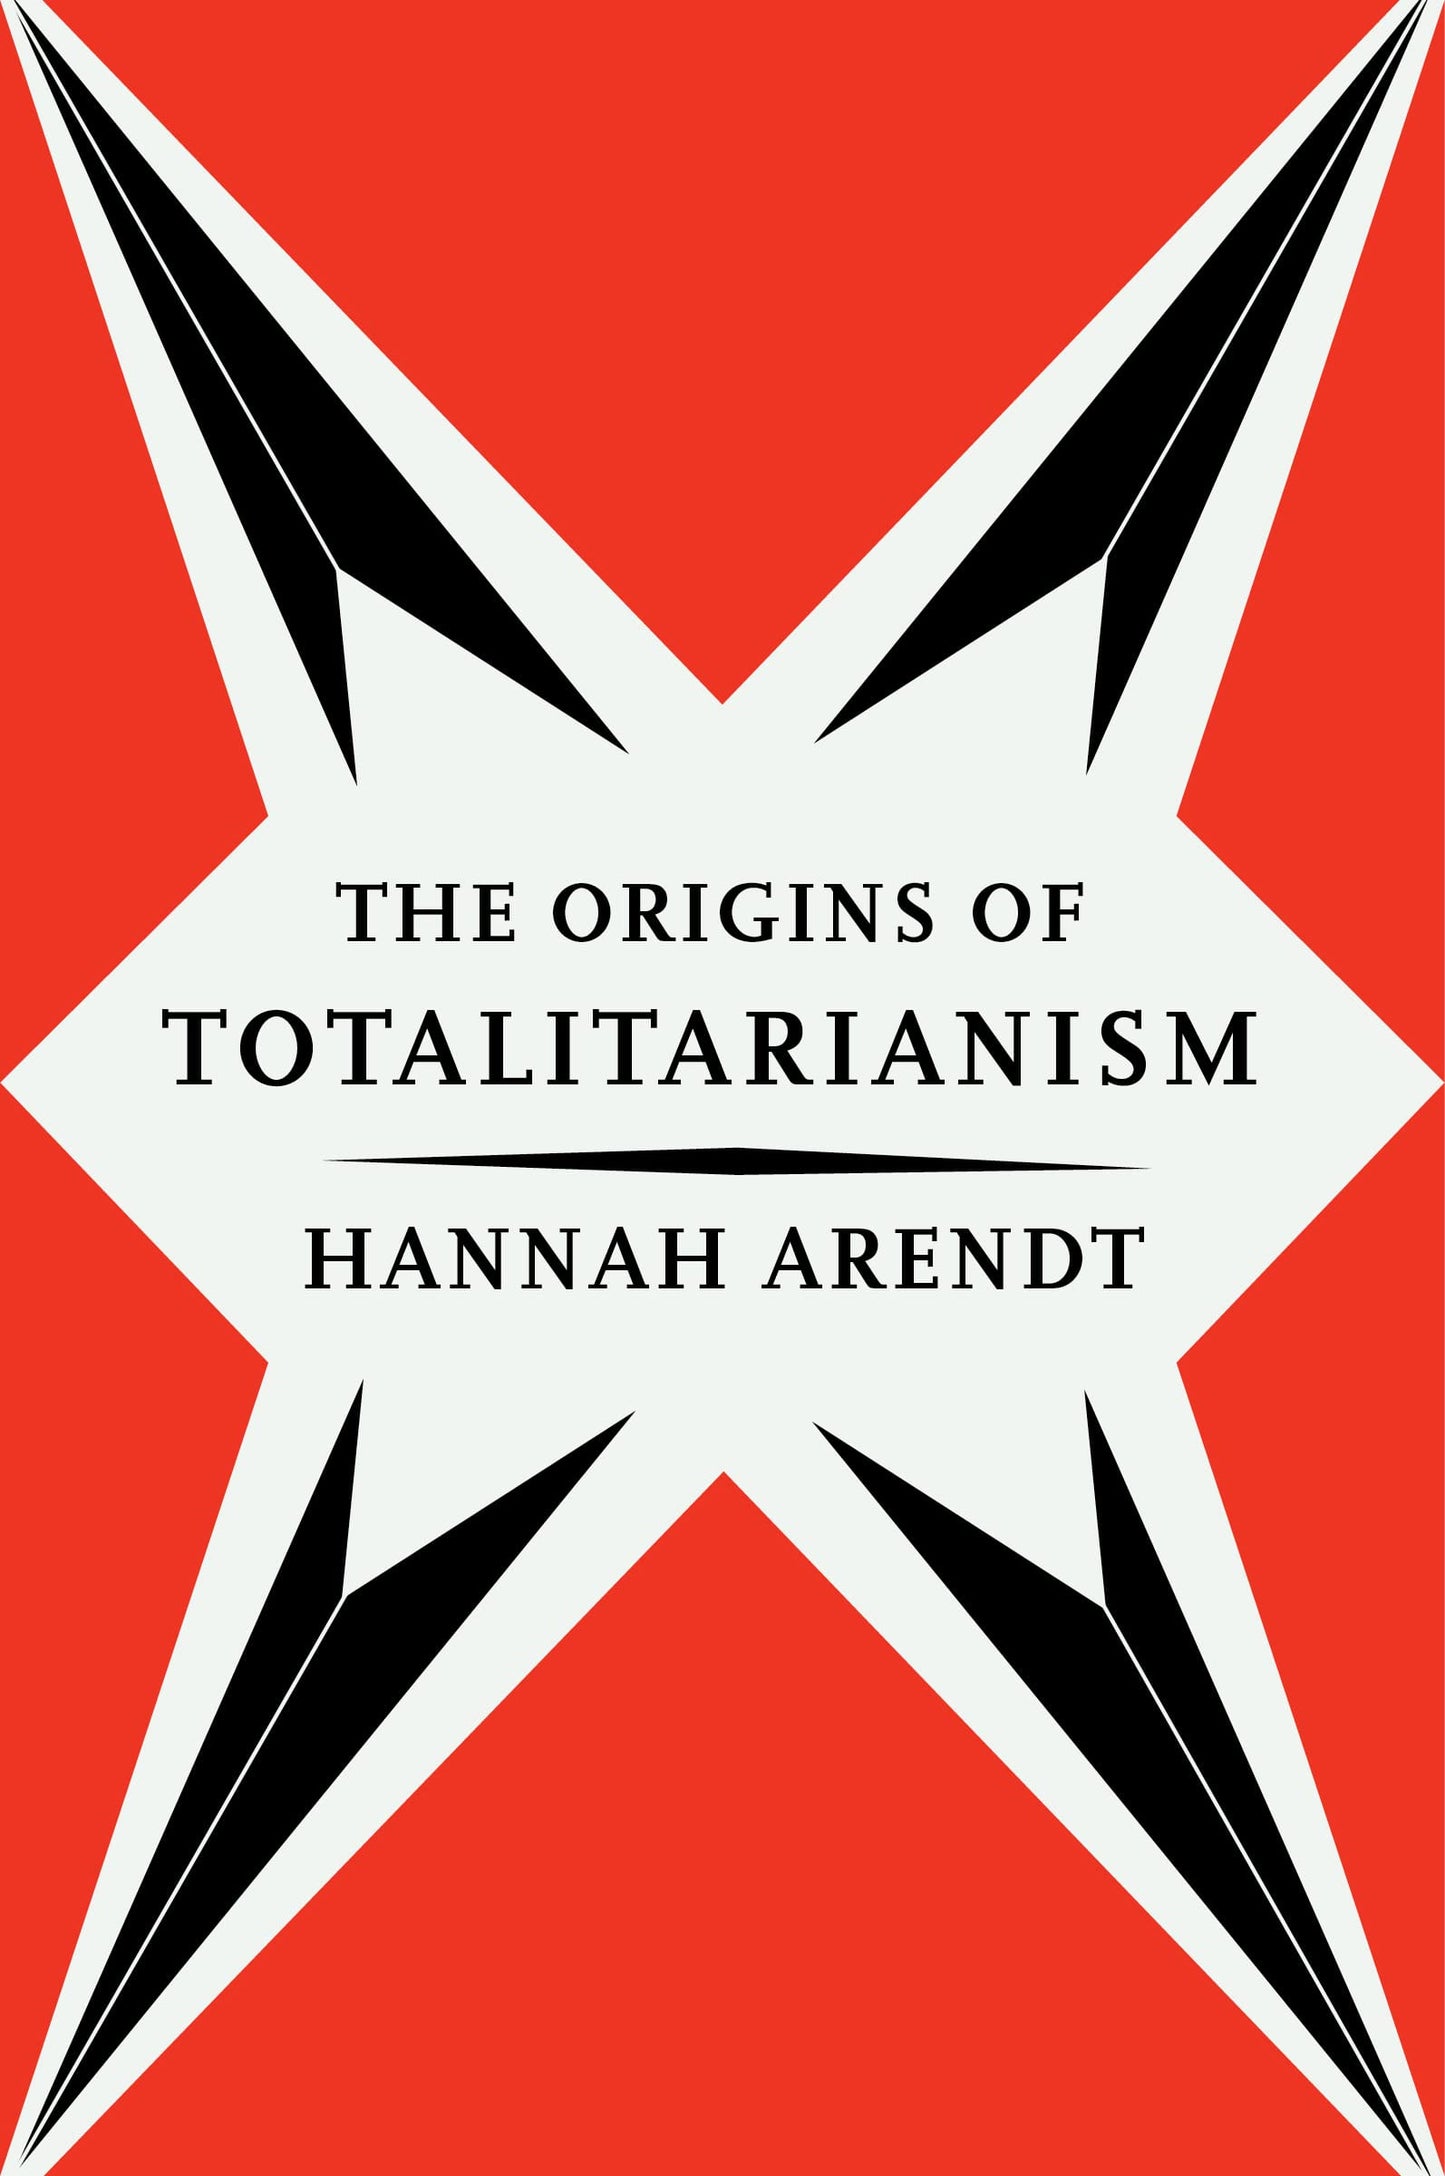 The Origins of Totalitarianism, by Hannah Arendt